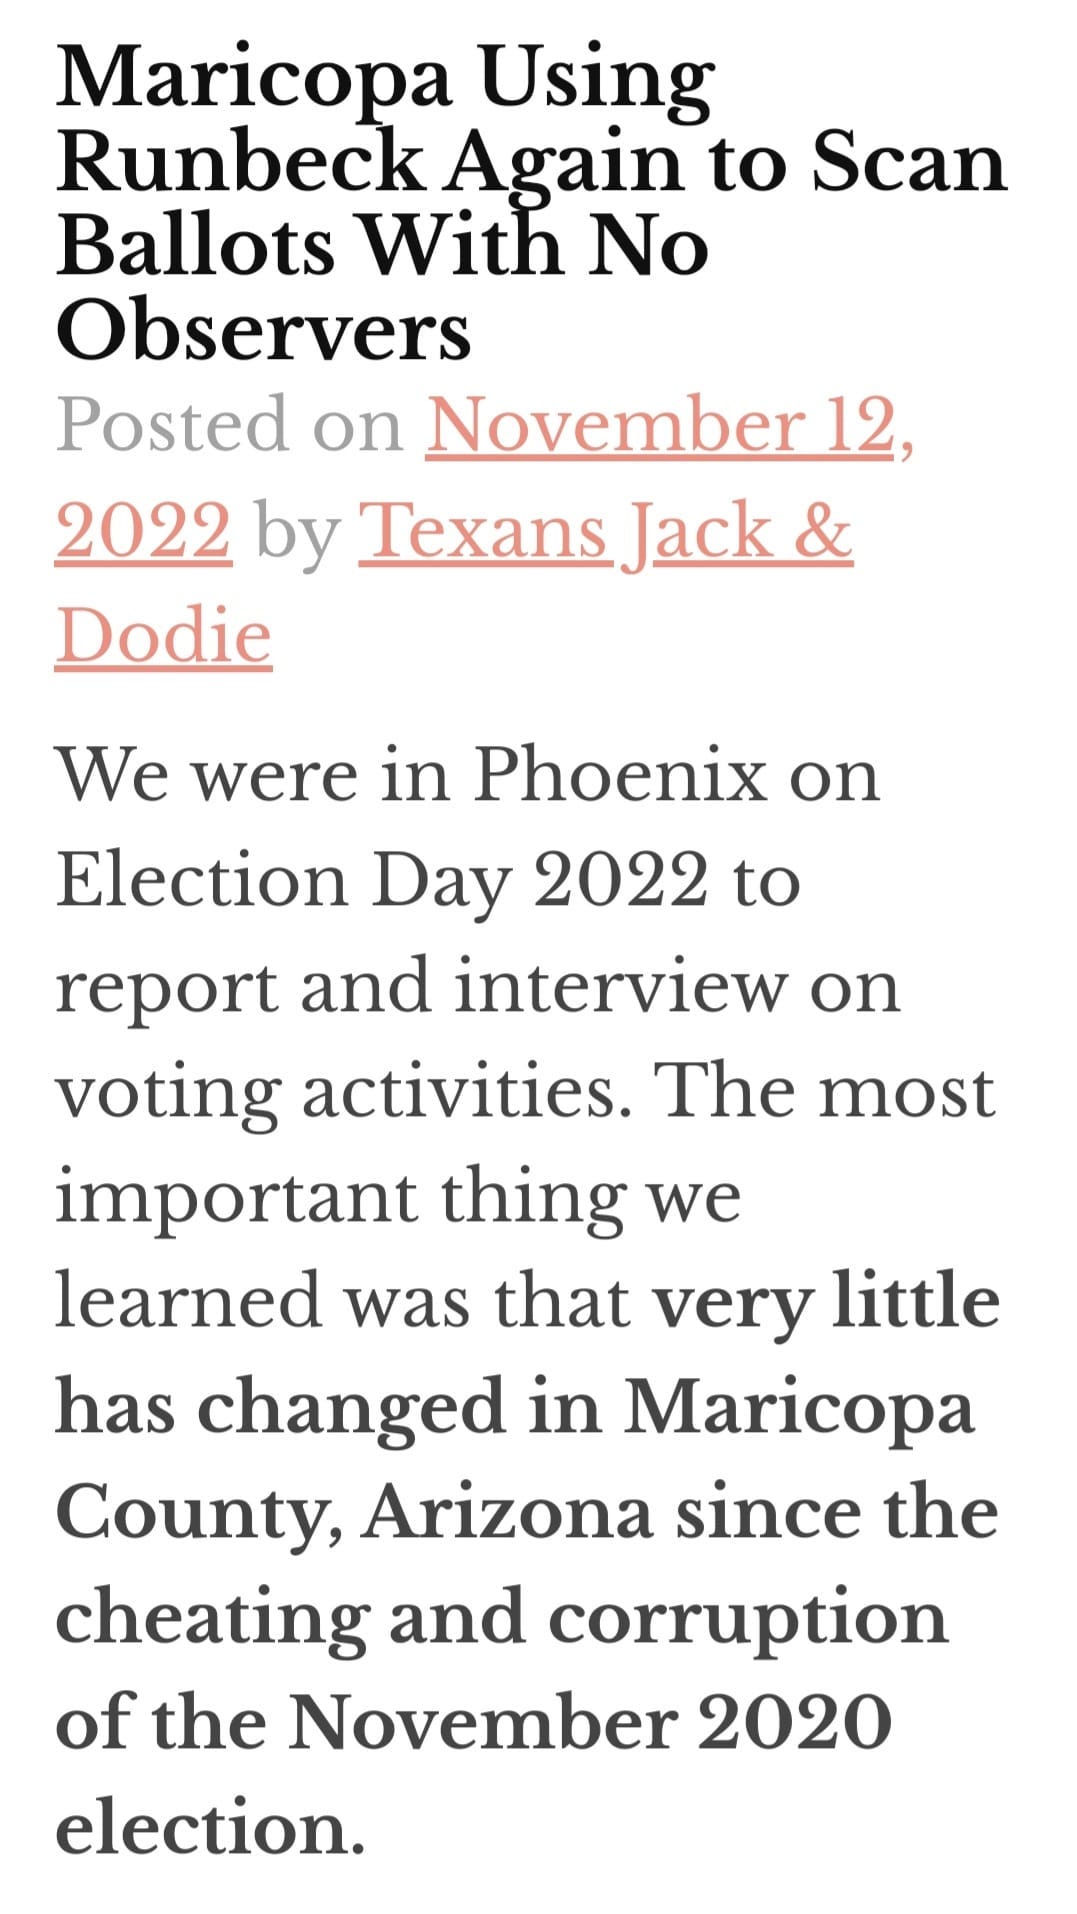 May be an image of text that says 'Maricopa Using Runbeck Again to Scan Ballots With No Observers Posted on November 12. 2022 by TexaJack & Dodie We were in Phoenix on Election Day 2022 to report and interview on voting activities. The most important thing we learned was that very little has changed in Maricopa County, Arizona since the cheating and corruption of the November 2020 election.'